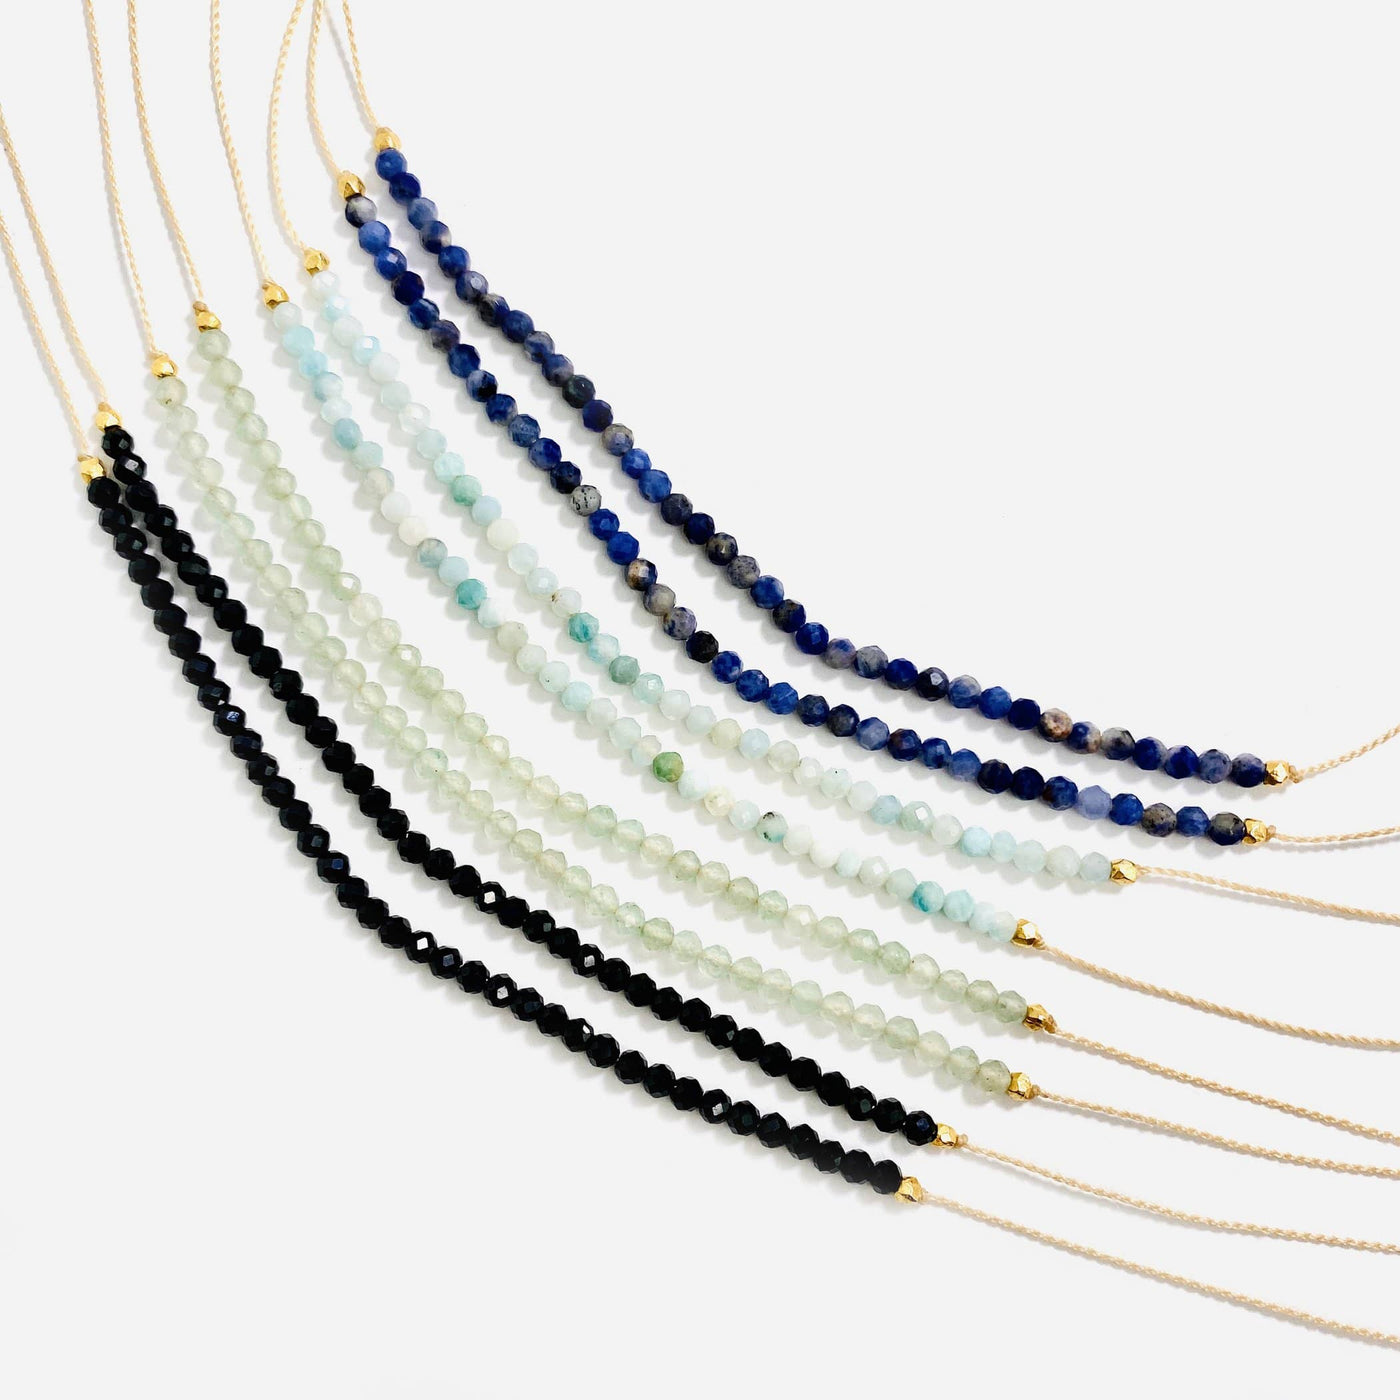 Gemstone Bead Finished Necklaces in different darker stones on a white background